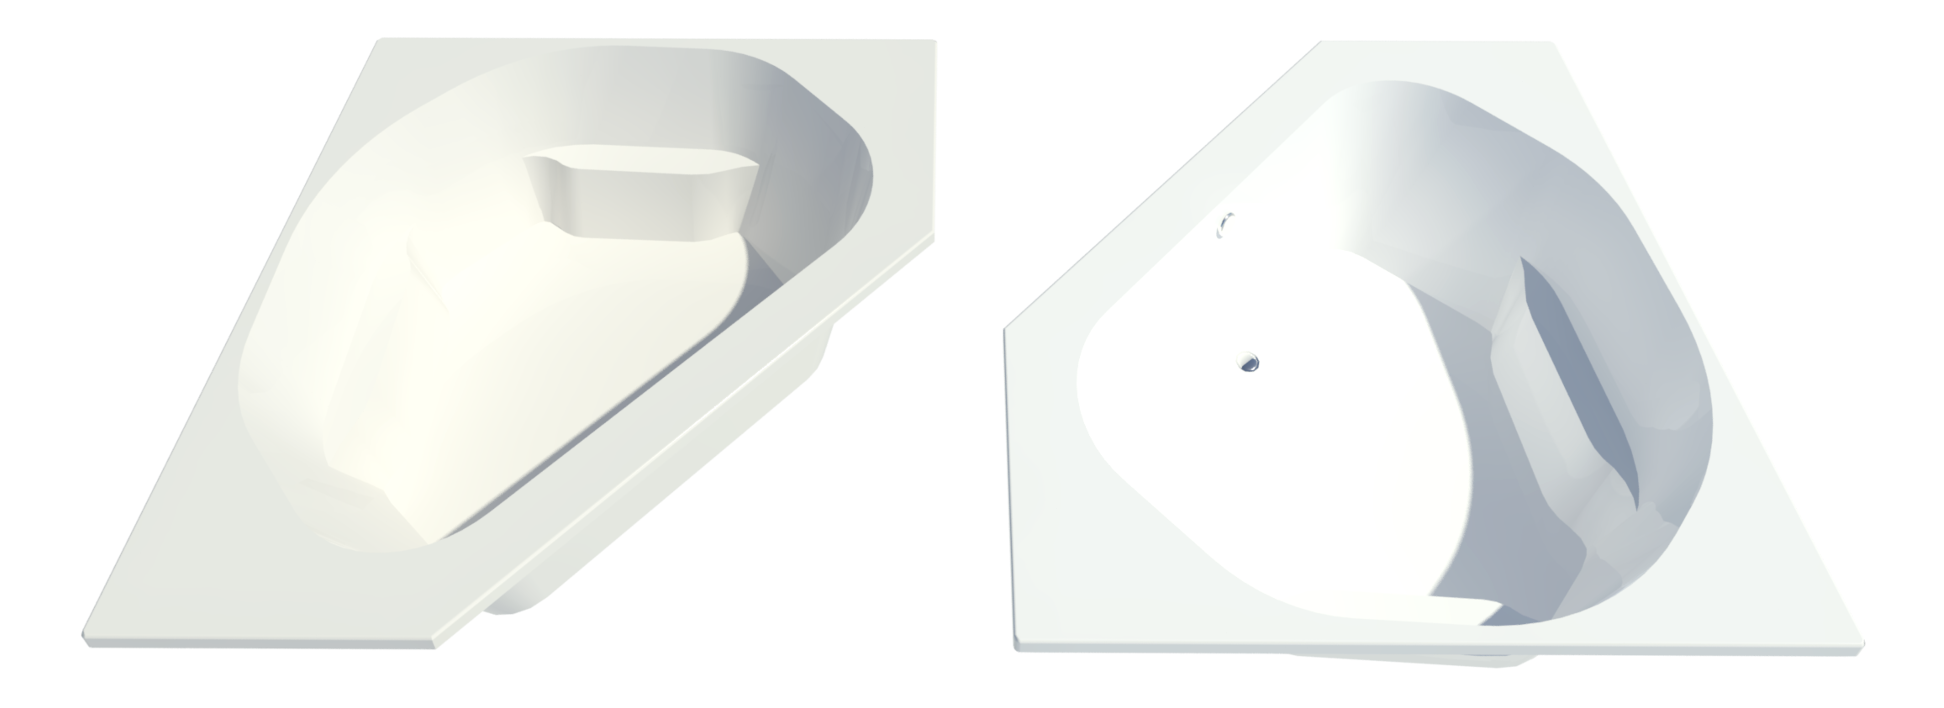 A Revit Raytrace render of two Americh’s Quantum 6060 drop-in bathtubs in almond and white finishes.